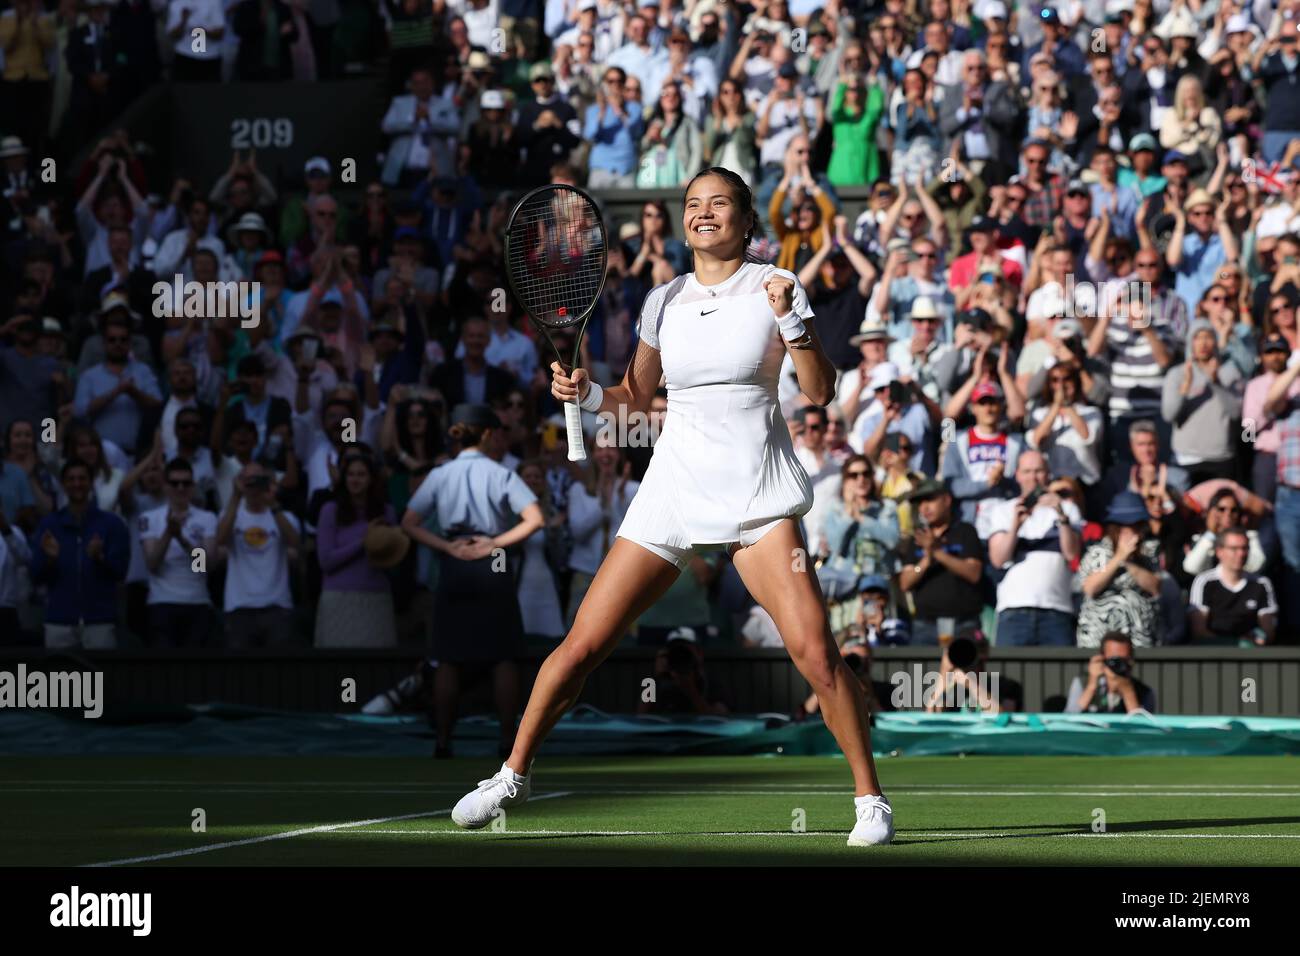 Wimbledon, UK, 27th June 2022, All England Lawn Tennis and Croquet Club, London, England; Wimbledon Tennis tournament; Emma Raducanu celebrates after she wins the match 2 sets to 0 against Alison Van